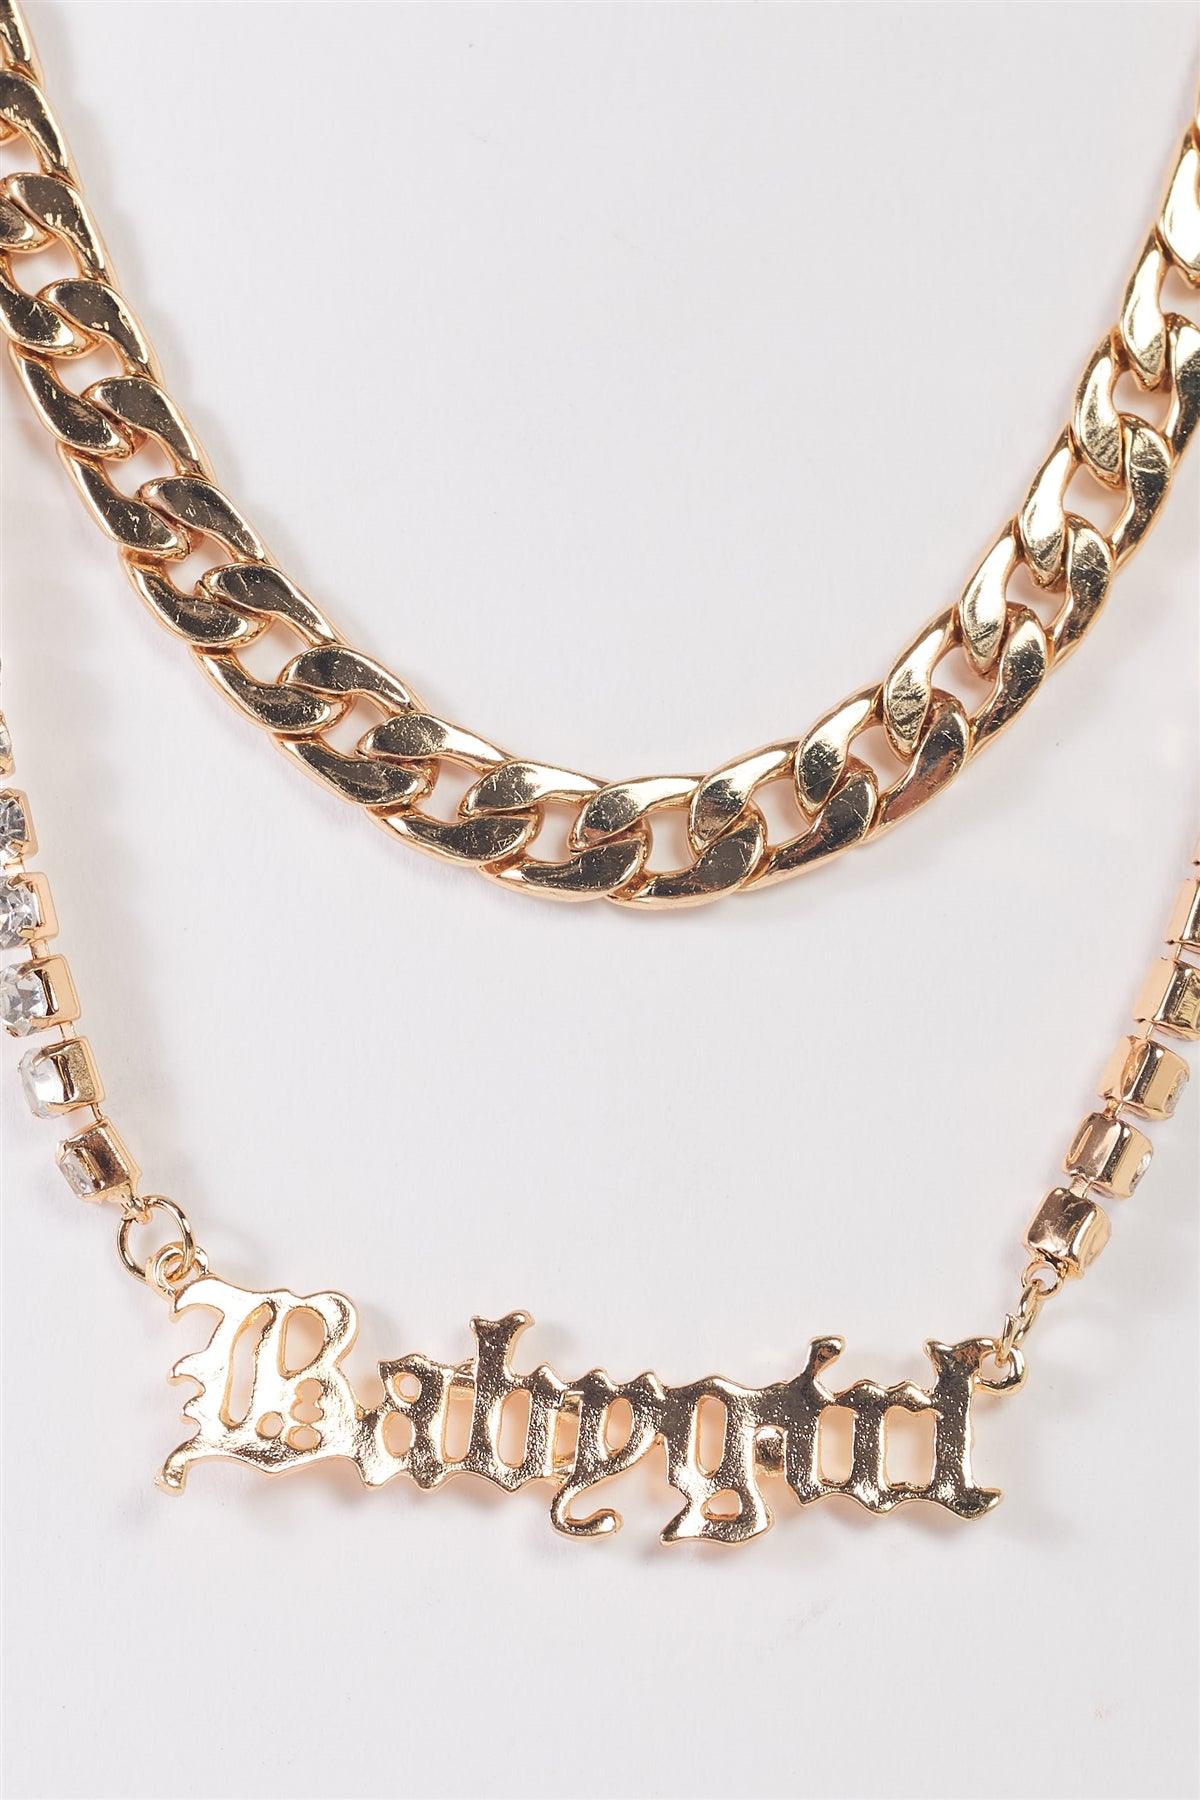 "Babygirl" Gold Chunky & Rhinestone Box Chains Set Necklace /3 Pieces